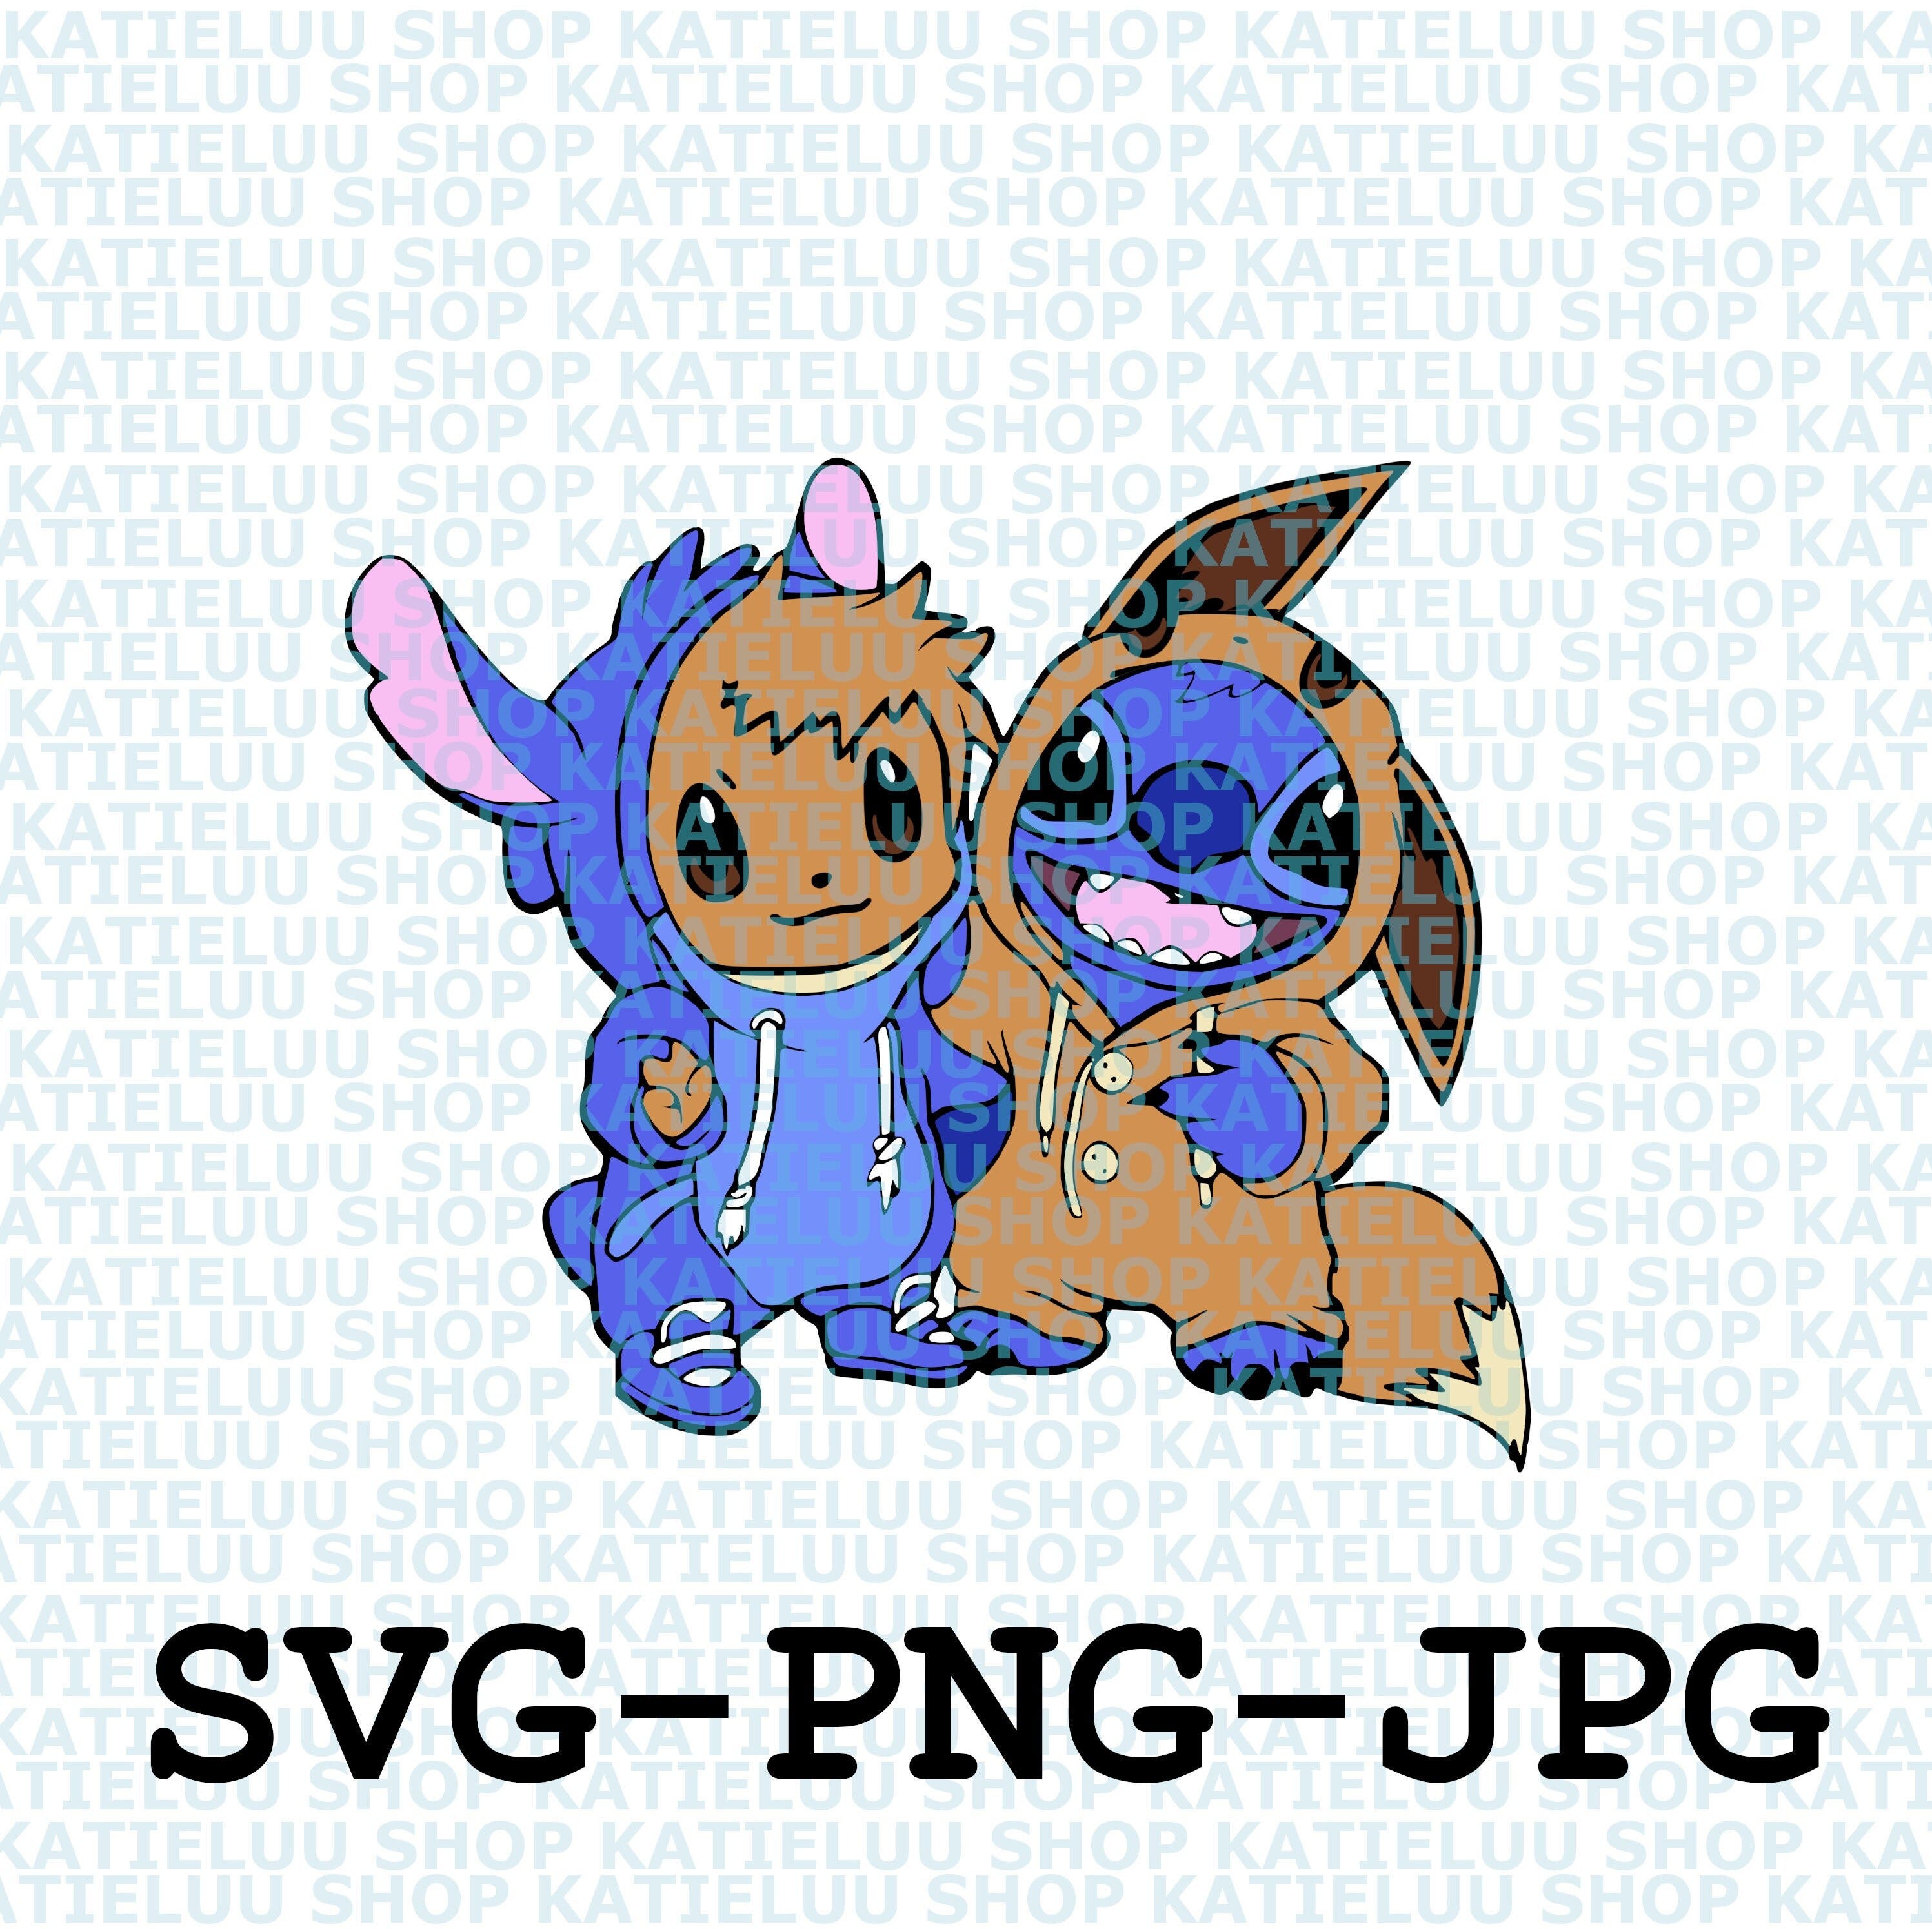 Stitch and Eevee png, Stitch and Pokemon Eevee svg, png. Characters friends png, svg digital download.